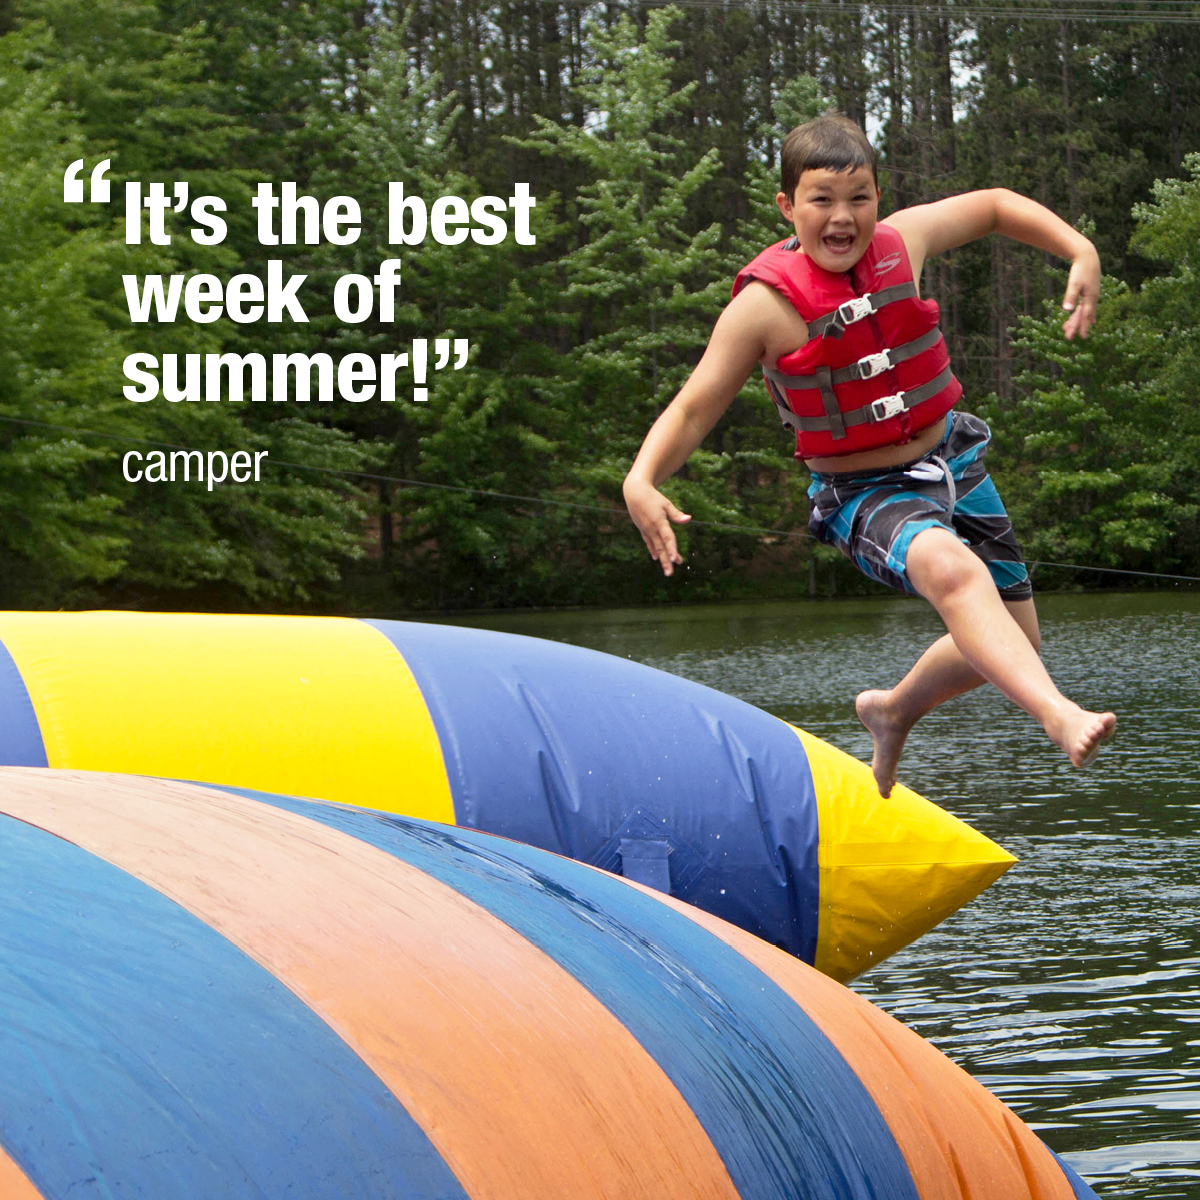 SpringHill Summer Camp - It's the best week of summer camp